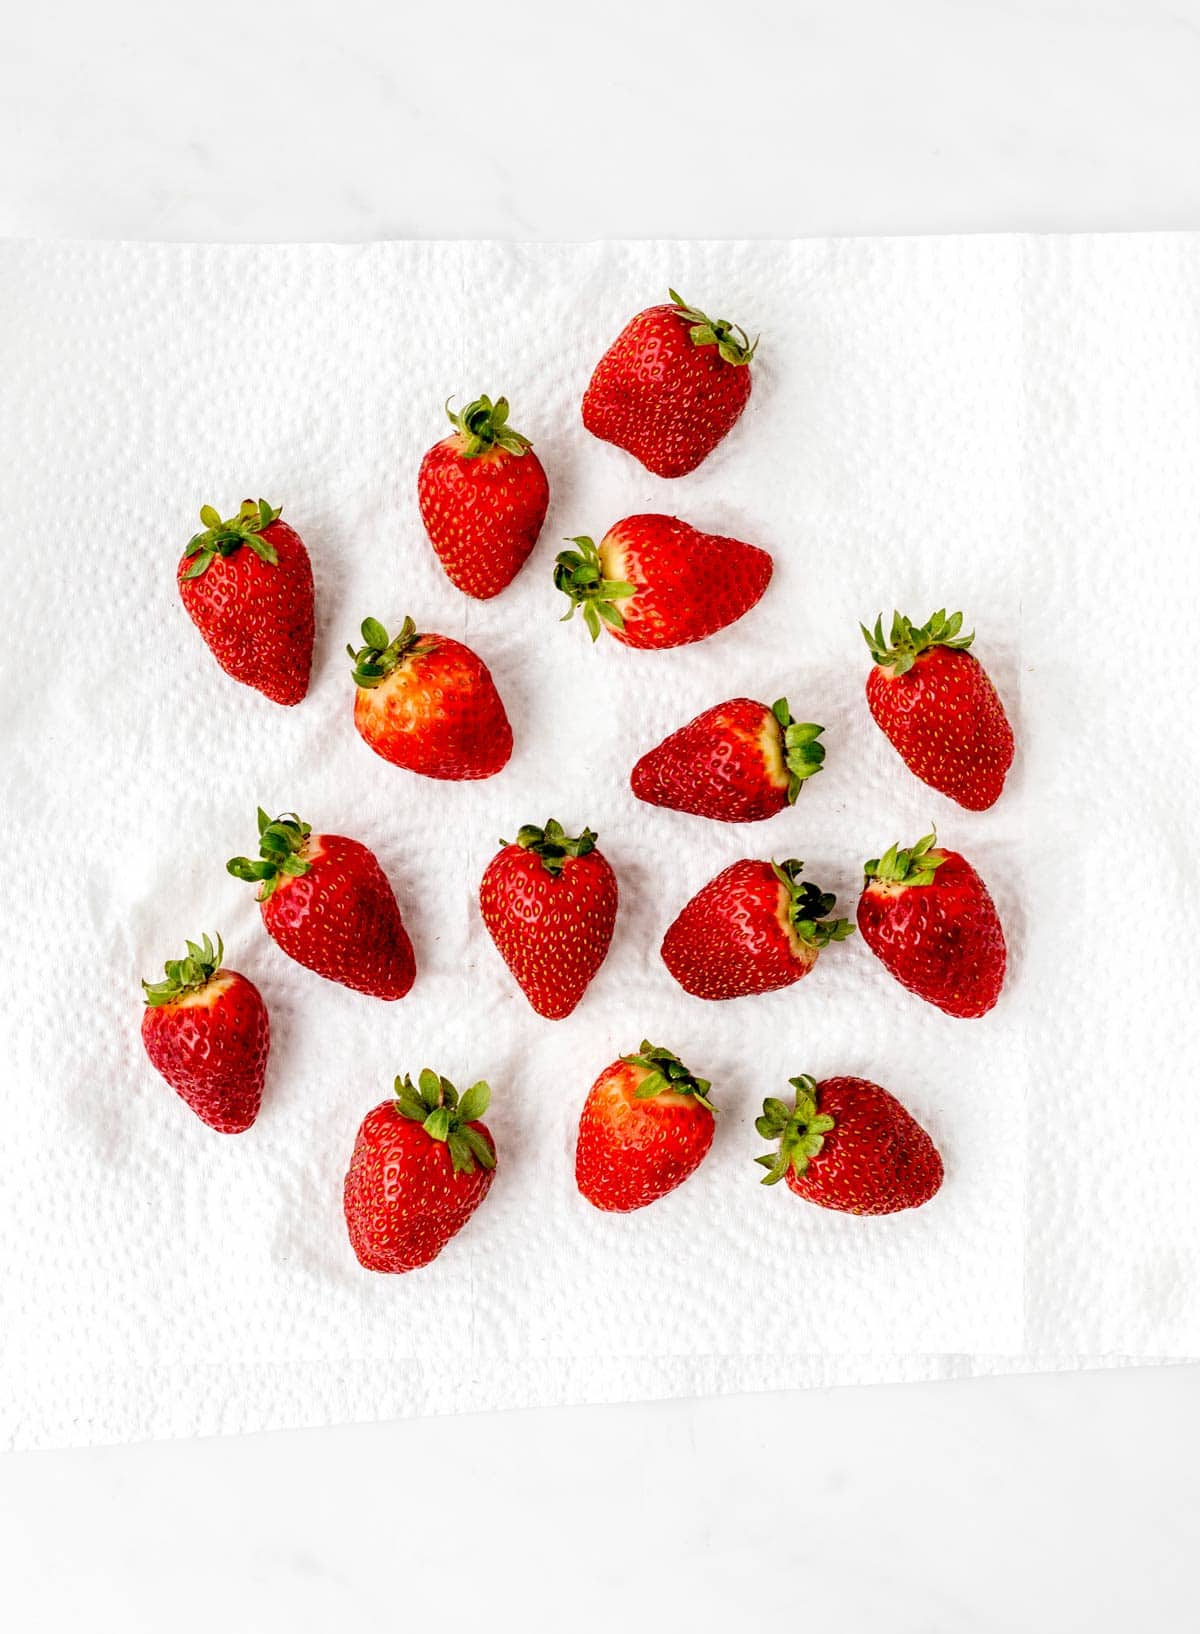 Freshly washed strawberries drying on a piece of paper towel.